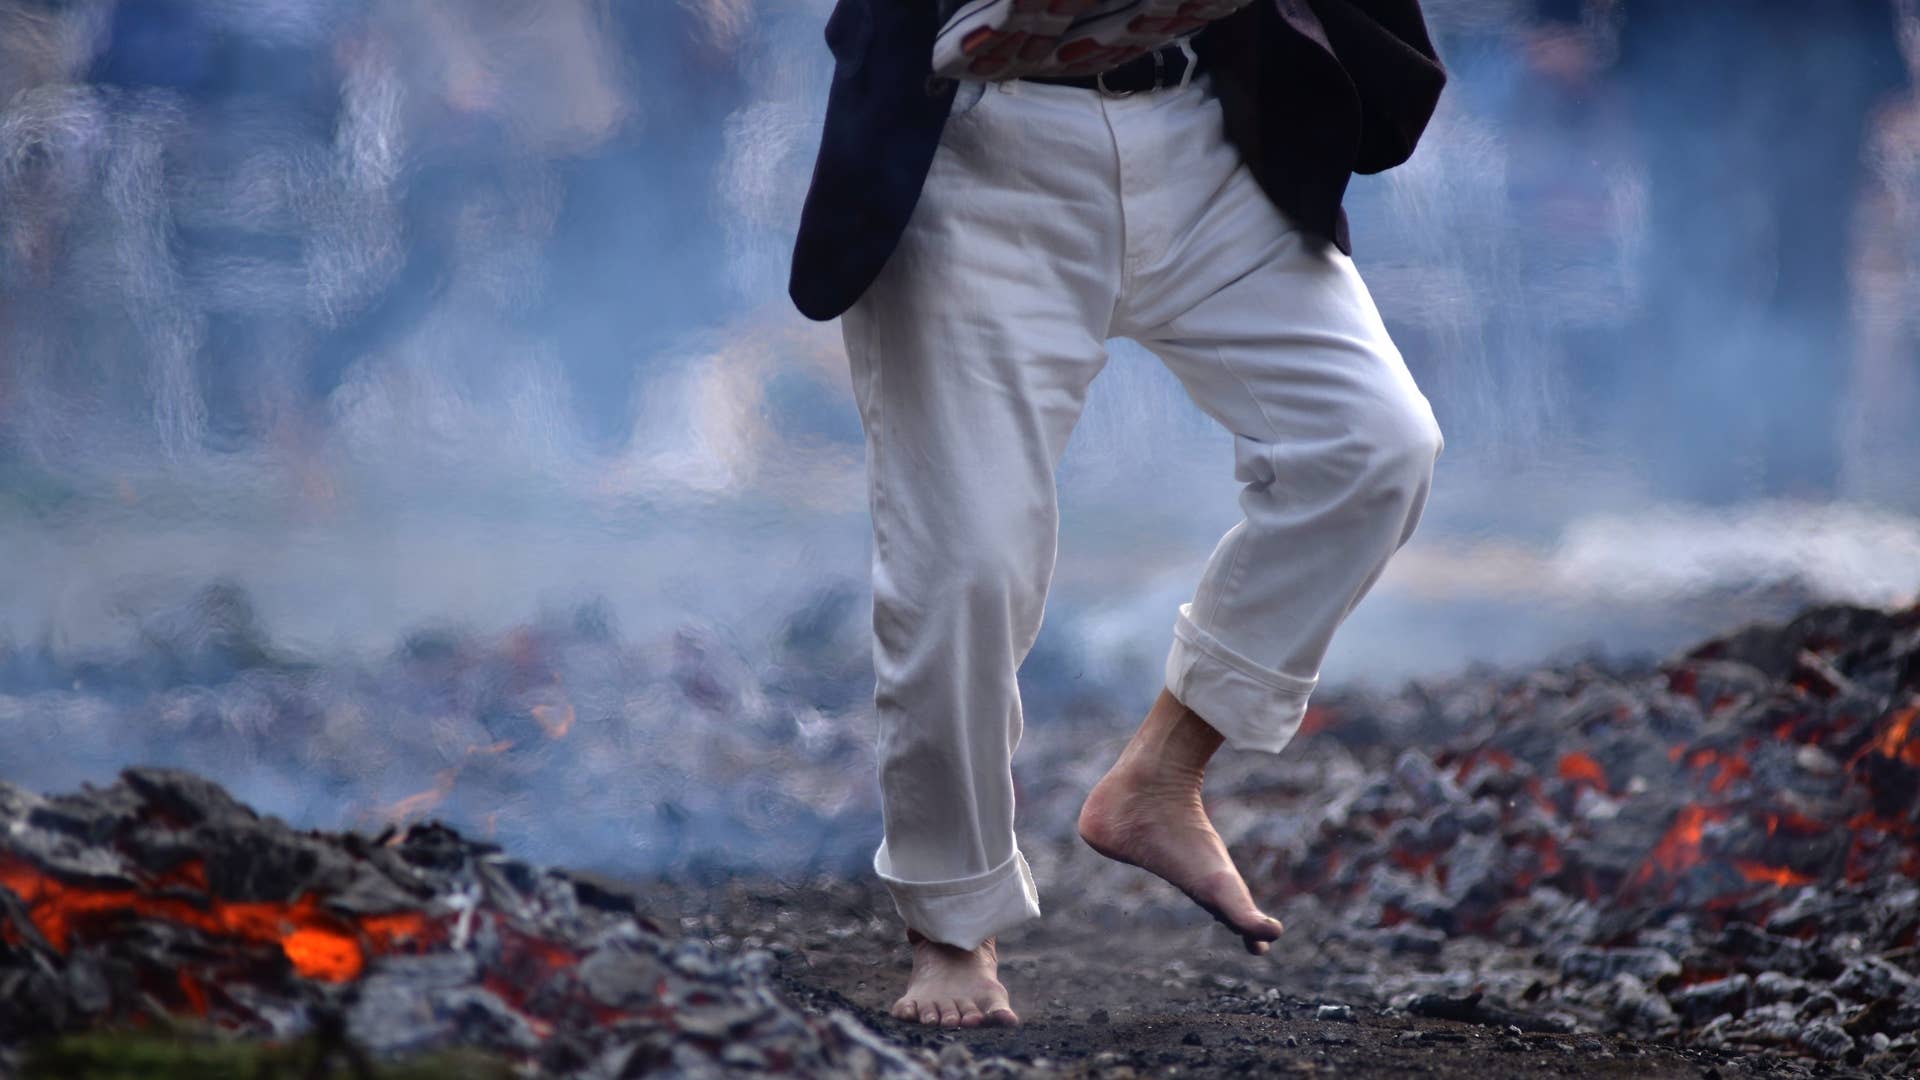 A photo of someone walking over coals.